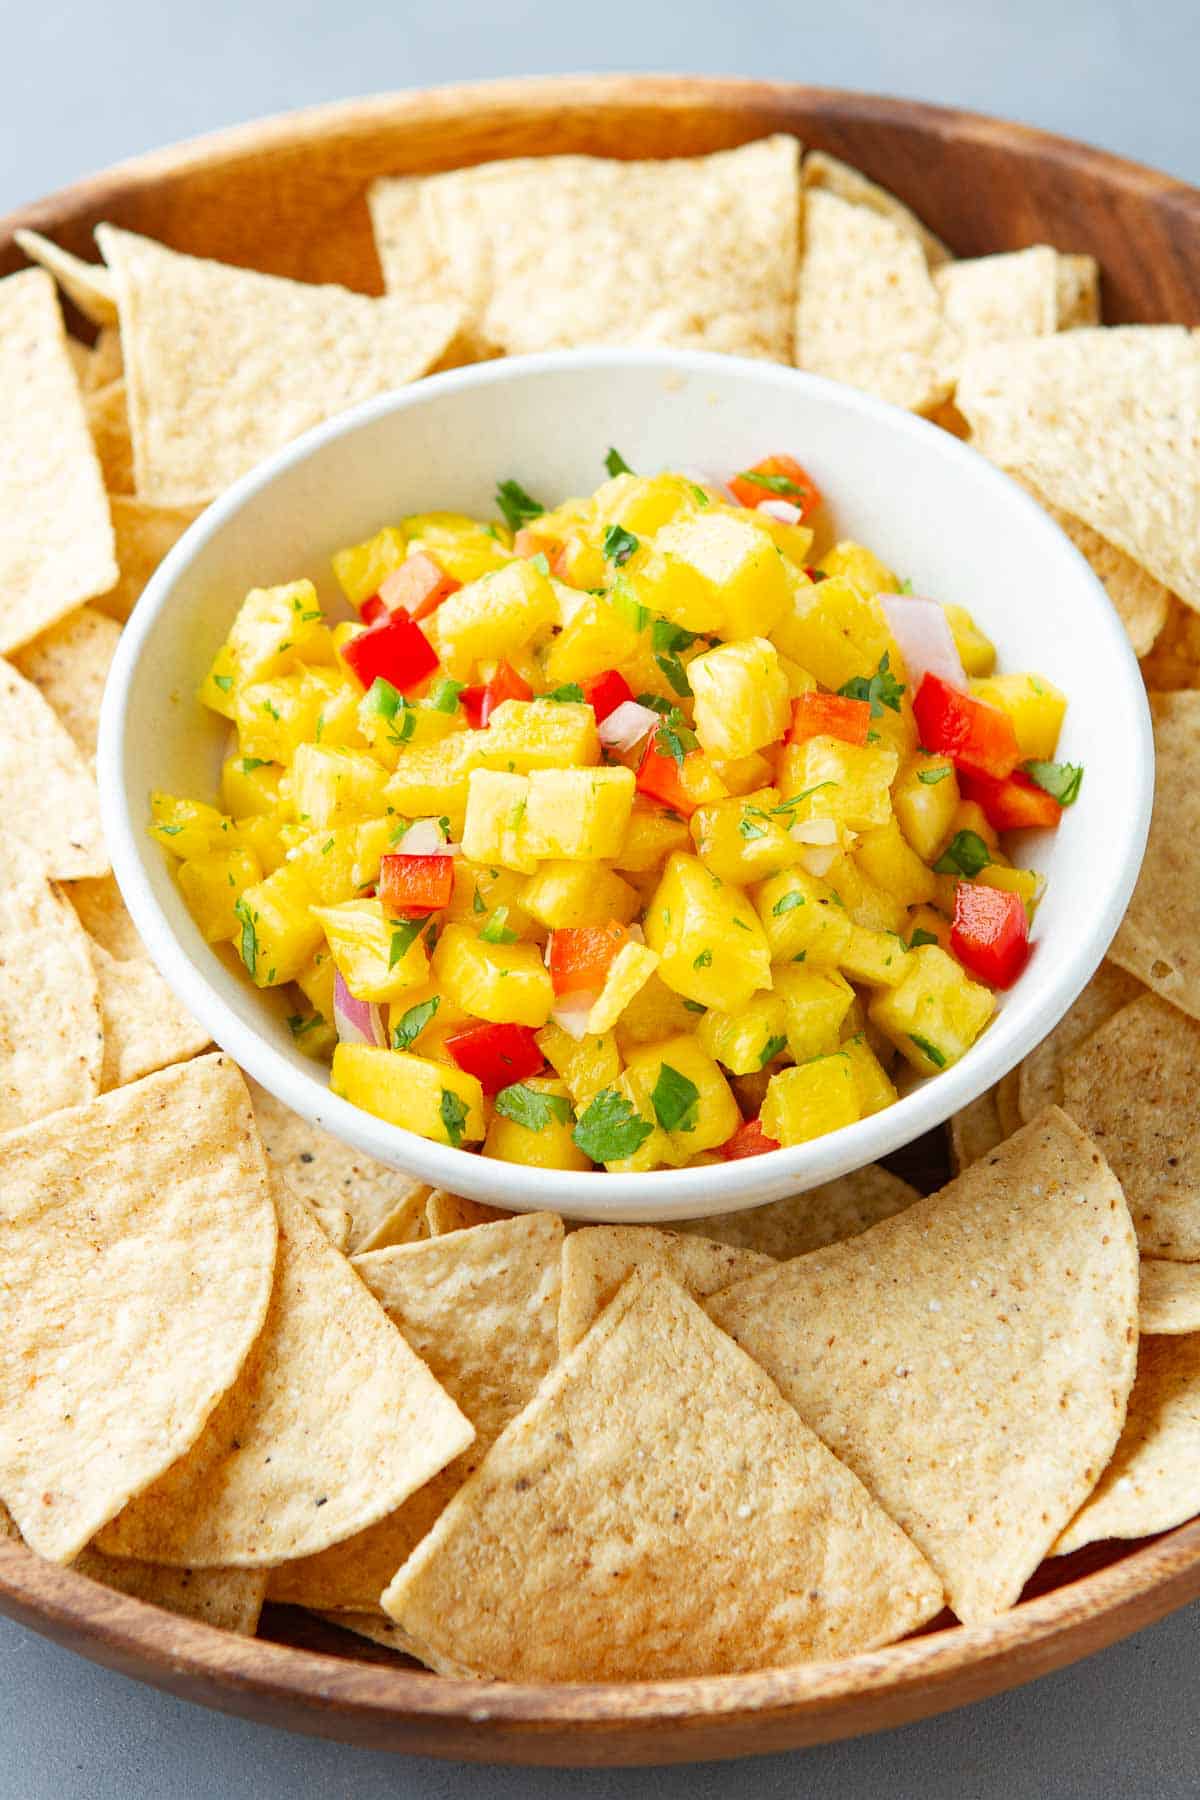 Create a tasty and colorful pineapple-mango salsa by blending the spicy sweetness of pineapple and mango with a spicy kick of jalapeño.  Use it as a sauce, taco topping, or marinade for grilled fish or chicken.